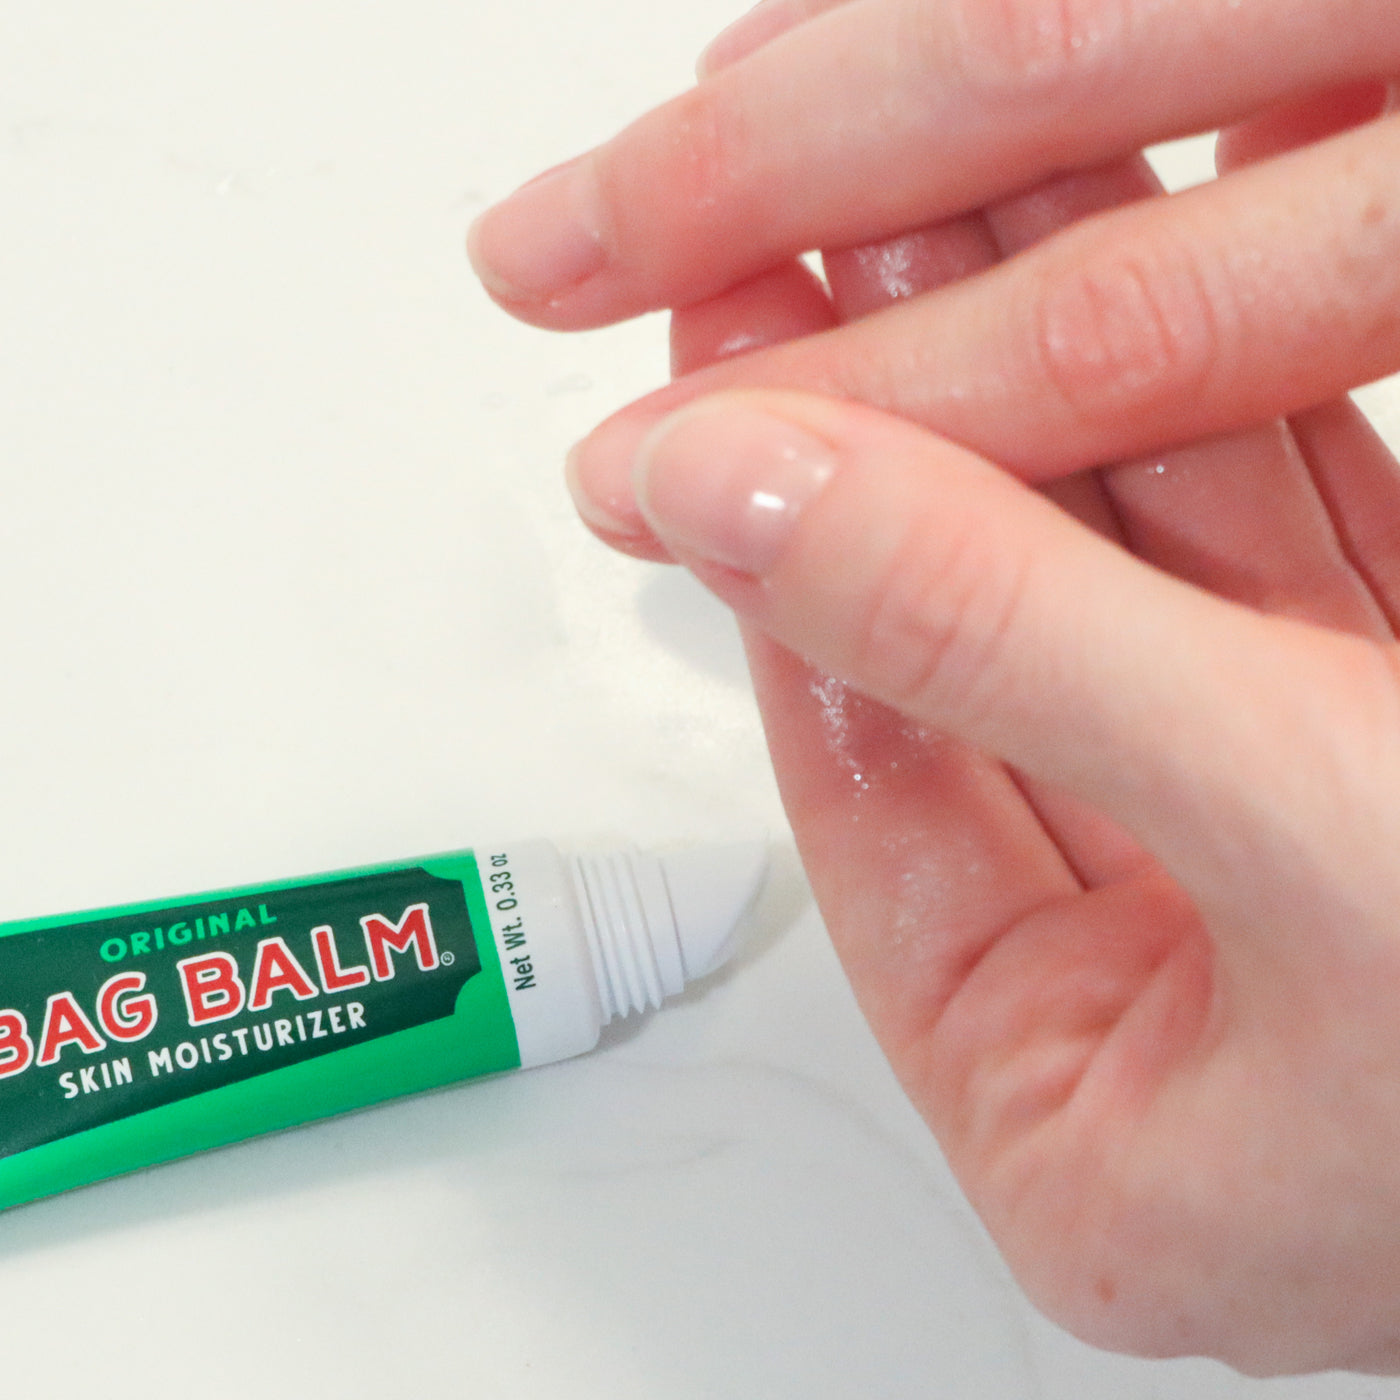 A tube of Bag Balm Skin Moisturizer being applied to a persons cuticles